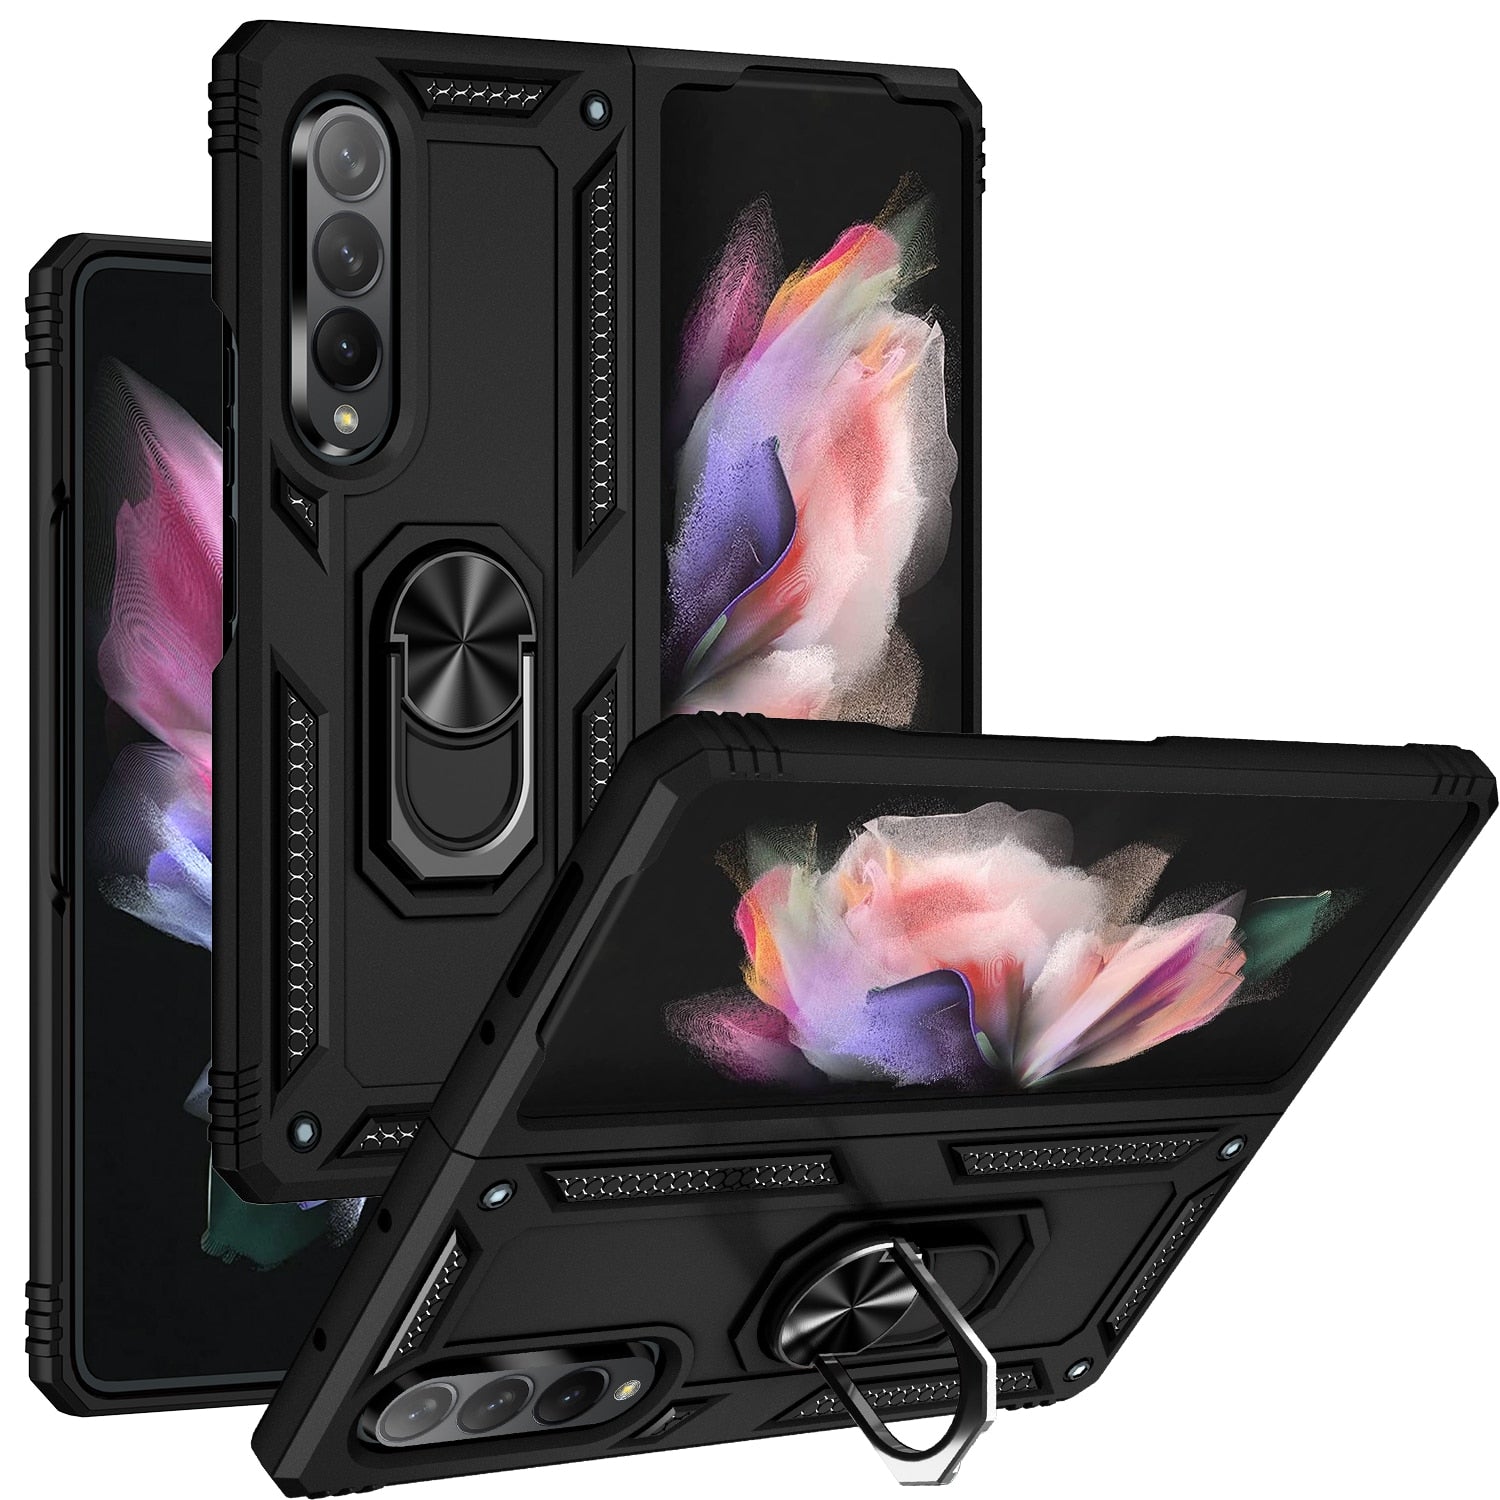 Case for Samsung Galaxy Z Fold 4 Fold 3, with Finger Ring Holder Kickstand, Military Grade Stand Cover Phone Cases for Z Fold4 - 0 Z Fold 3 / Black / United States Find Epic Store